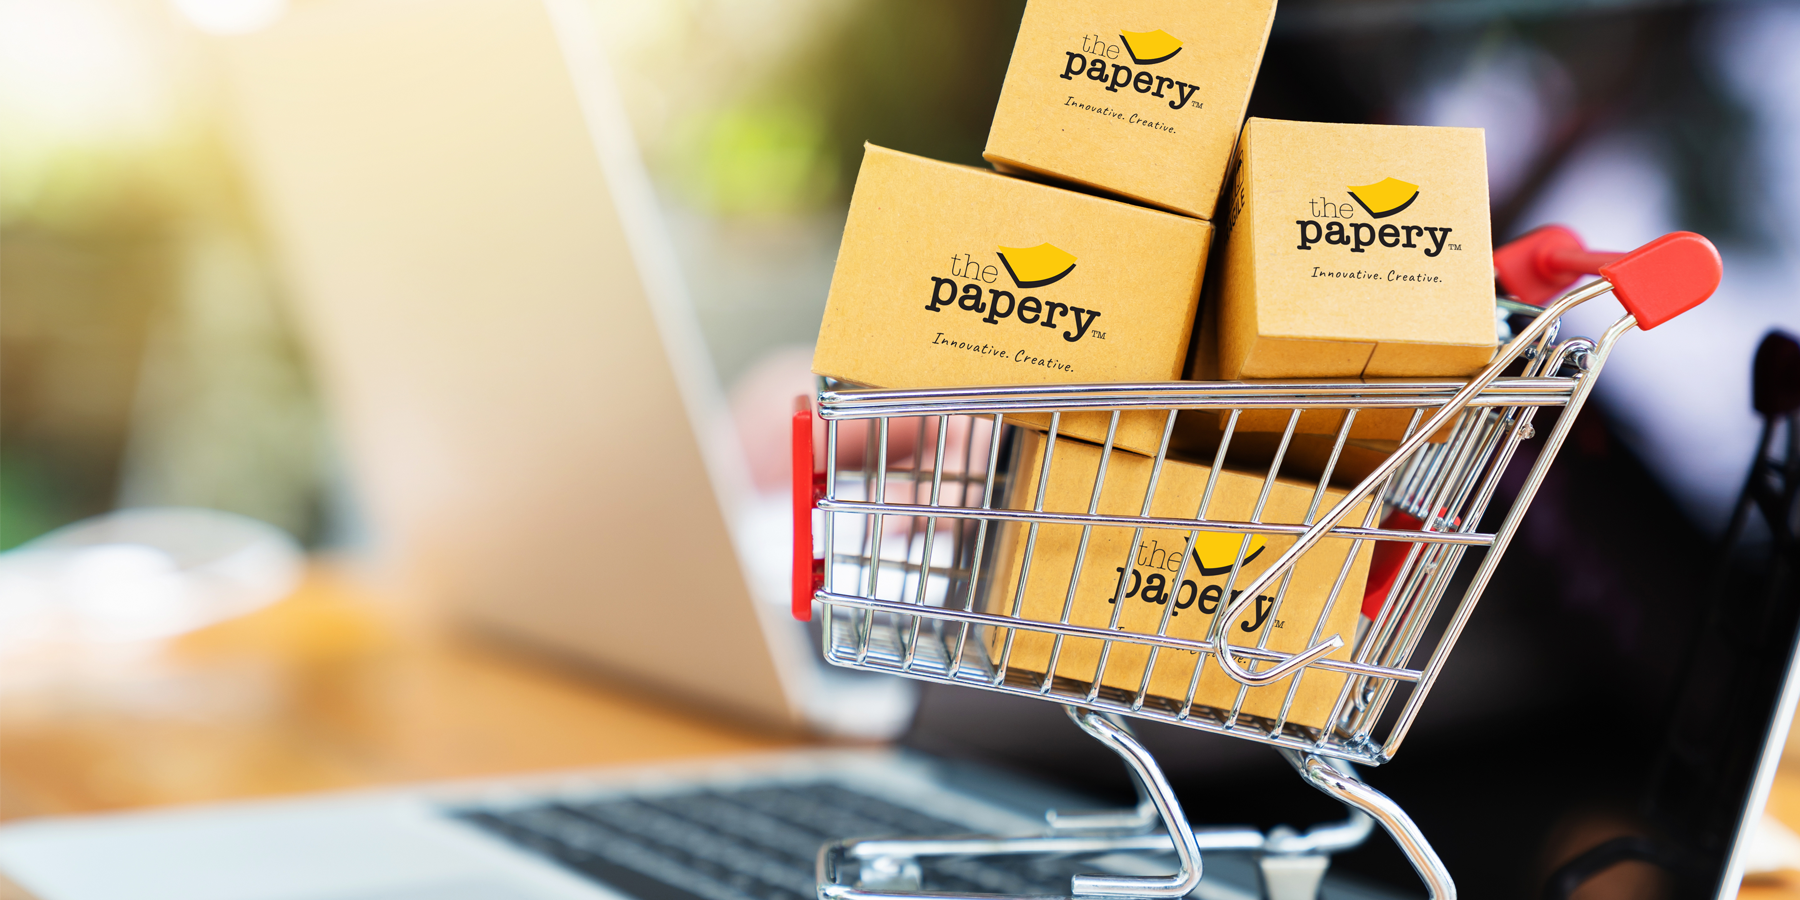 Image shows a shopping cart, holding boxes with "The Papery" logo